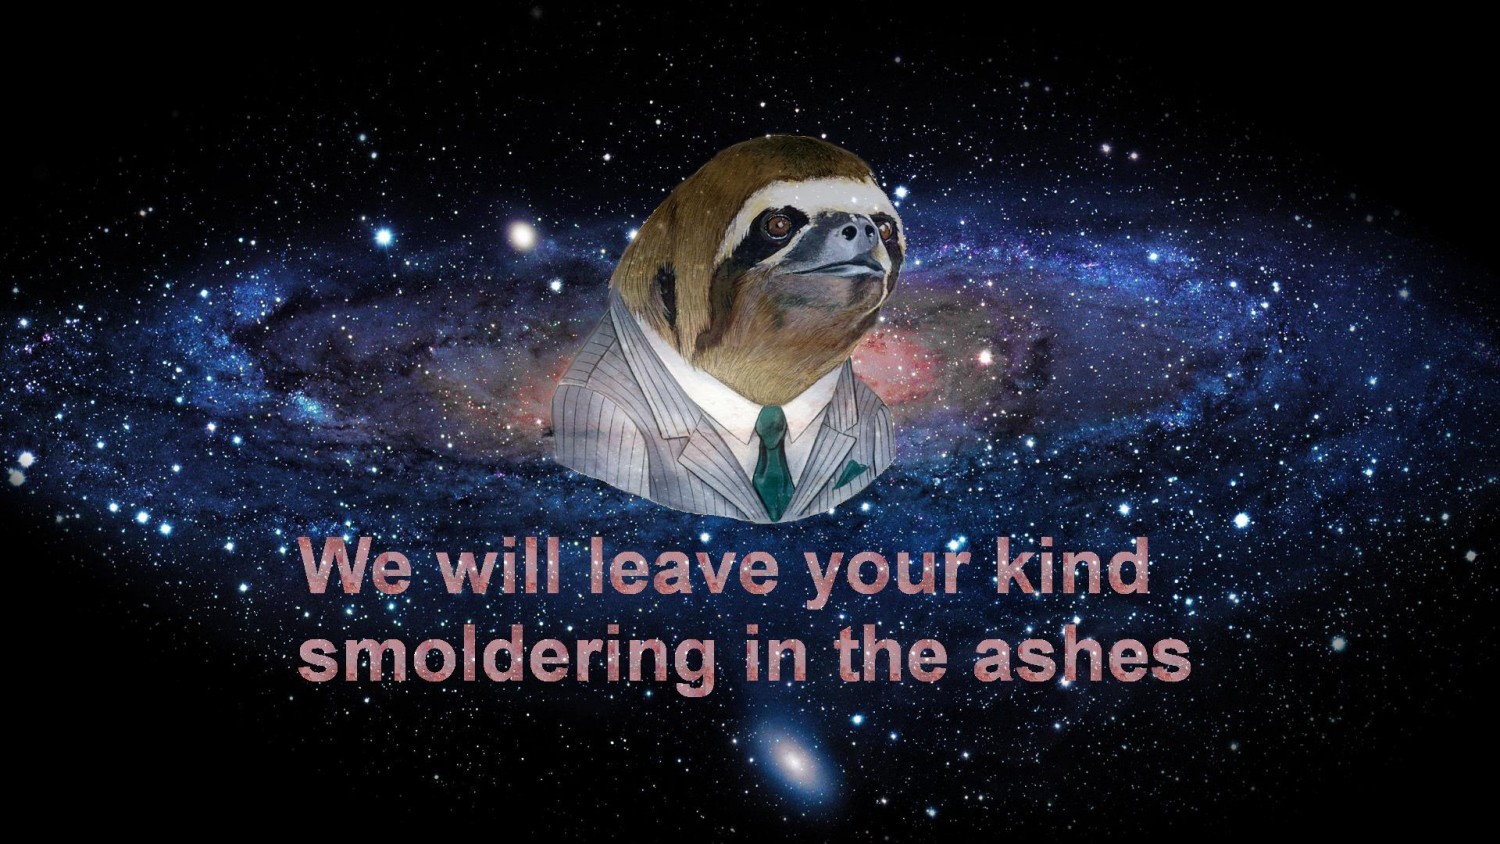 We will leave your kind smoldering in the ashes